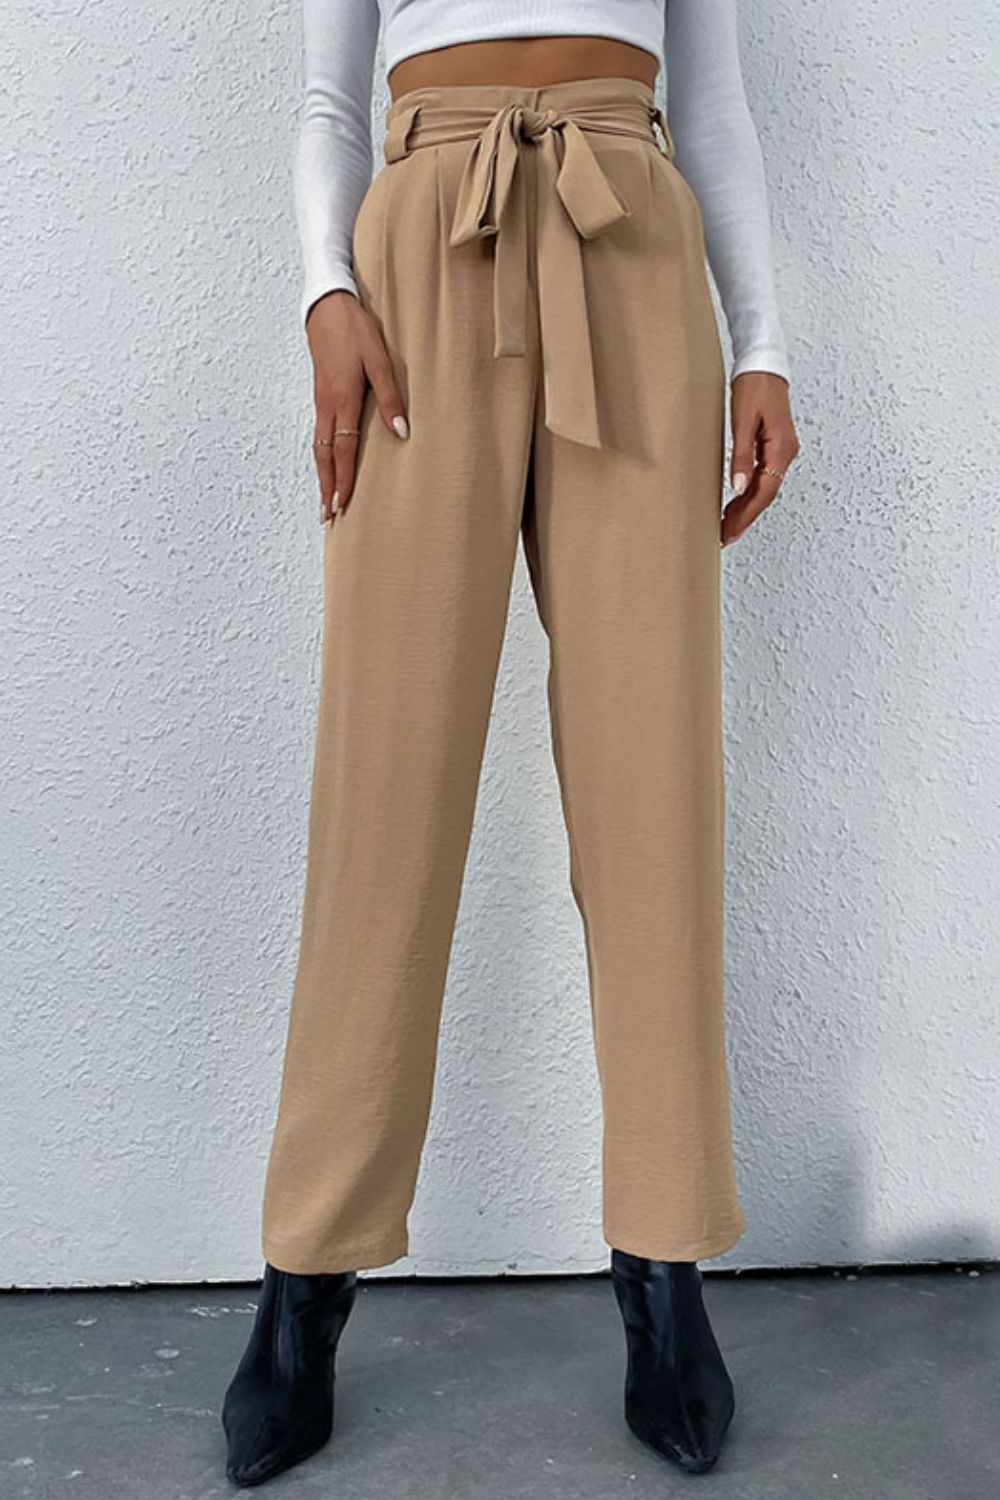 Belted Straight Leg Pants with Pockets - Khaki